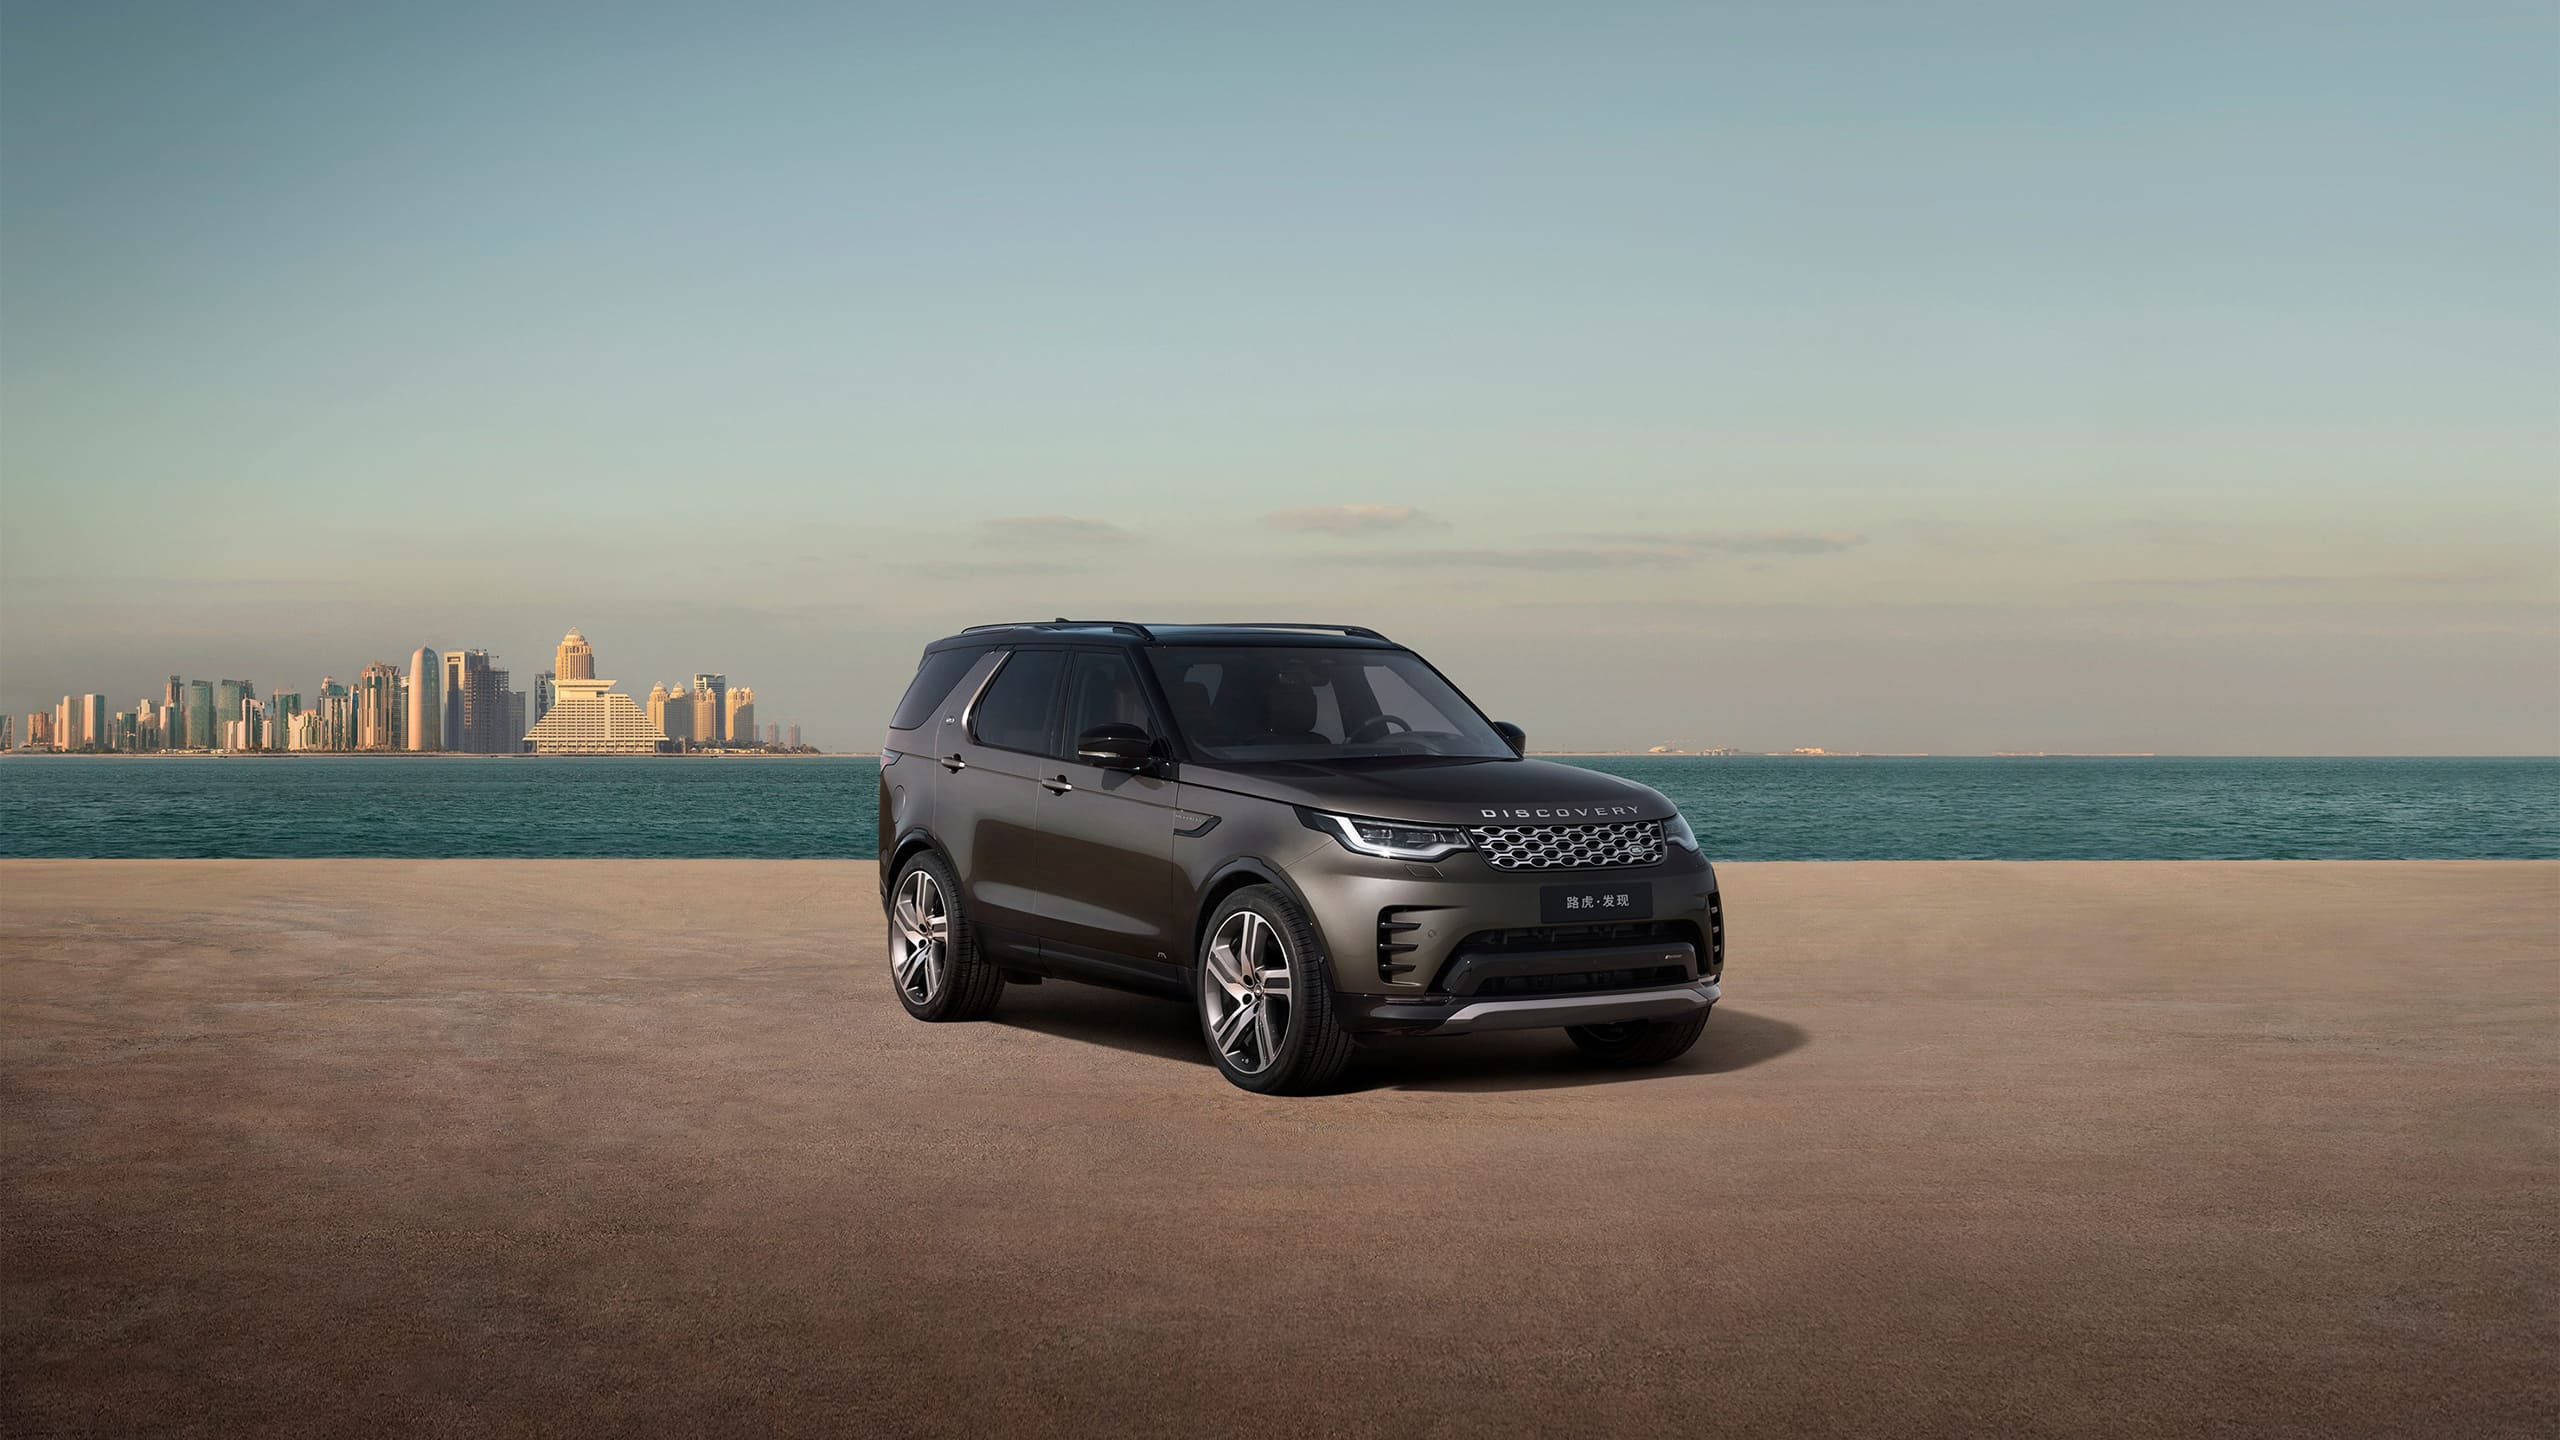 Land Rover Discovery Near the sea